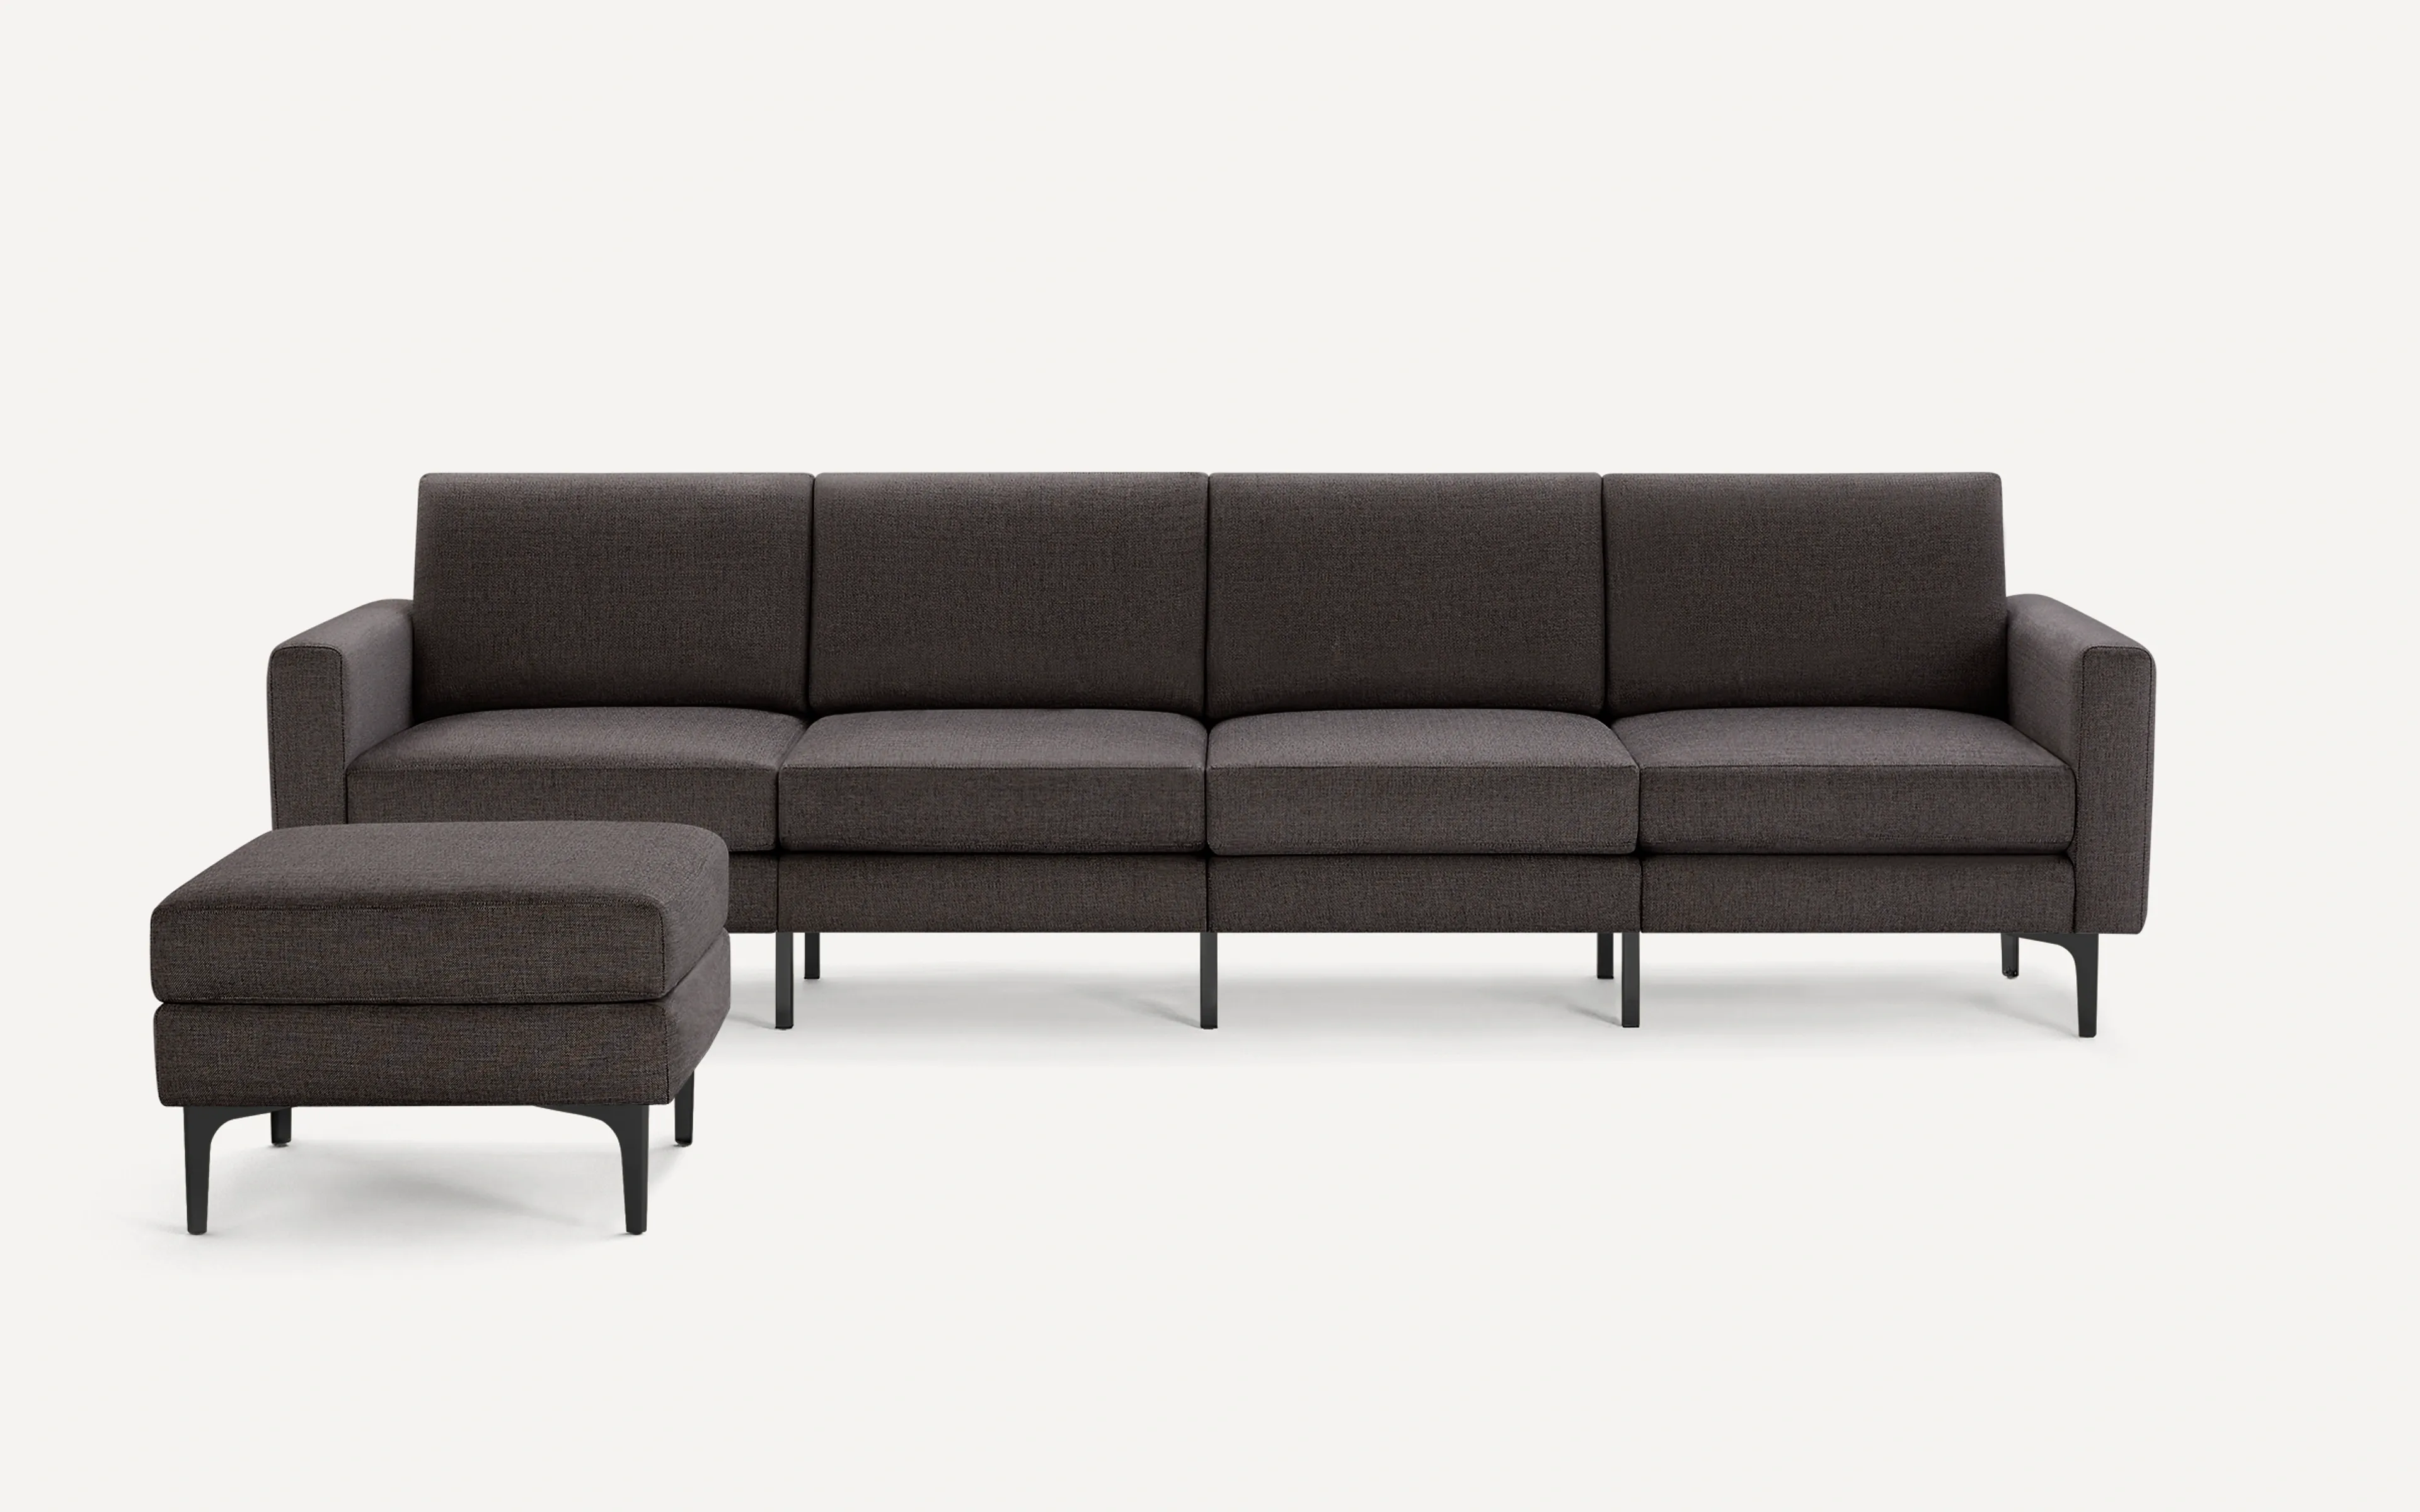 Original Nomad King Sofa with Ottoman in Charcoal Fabric